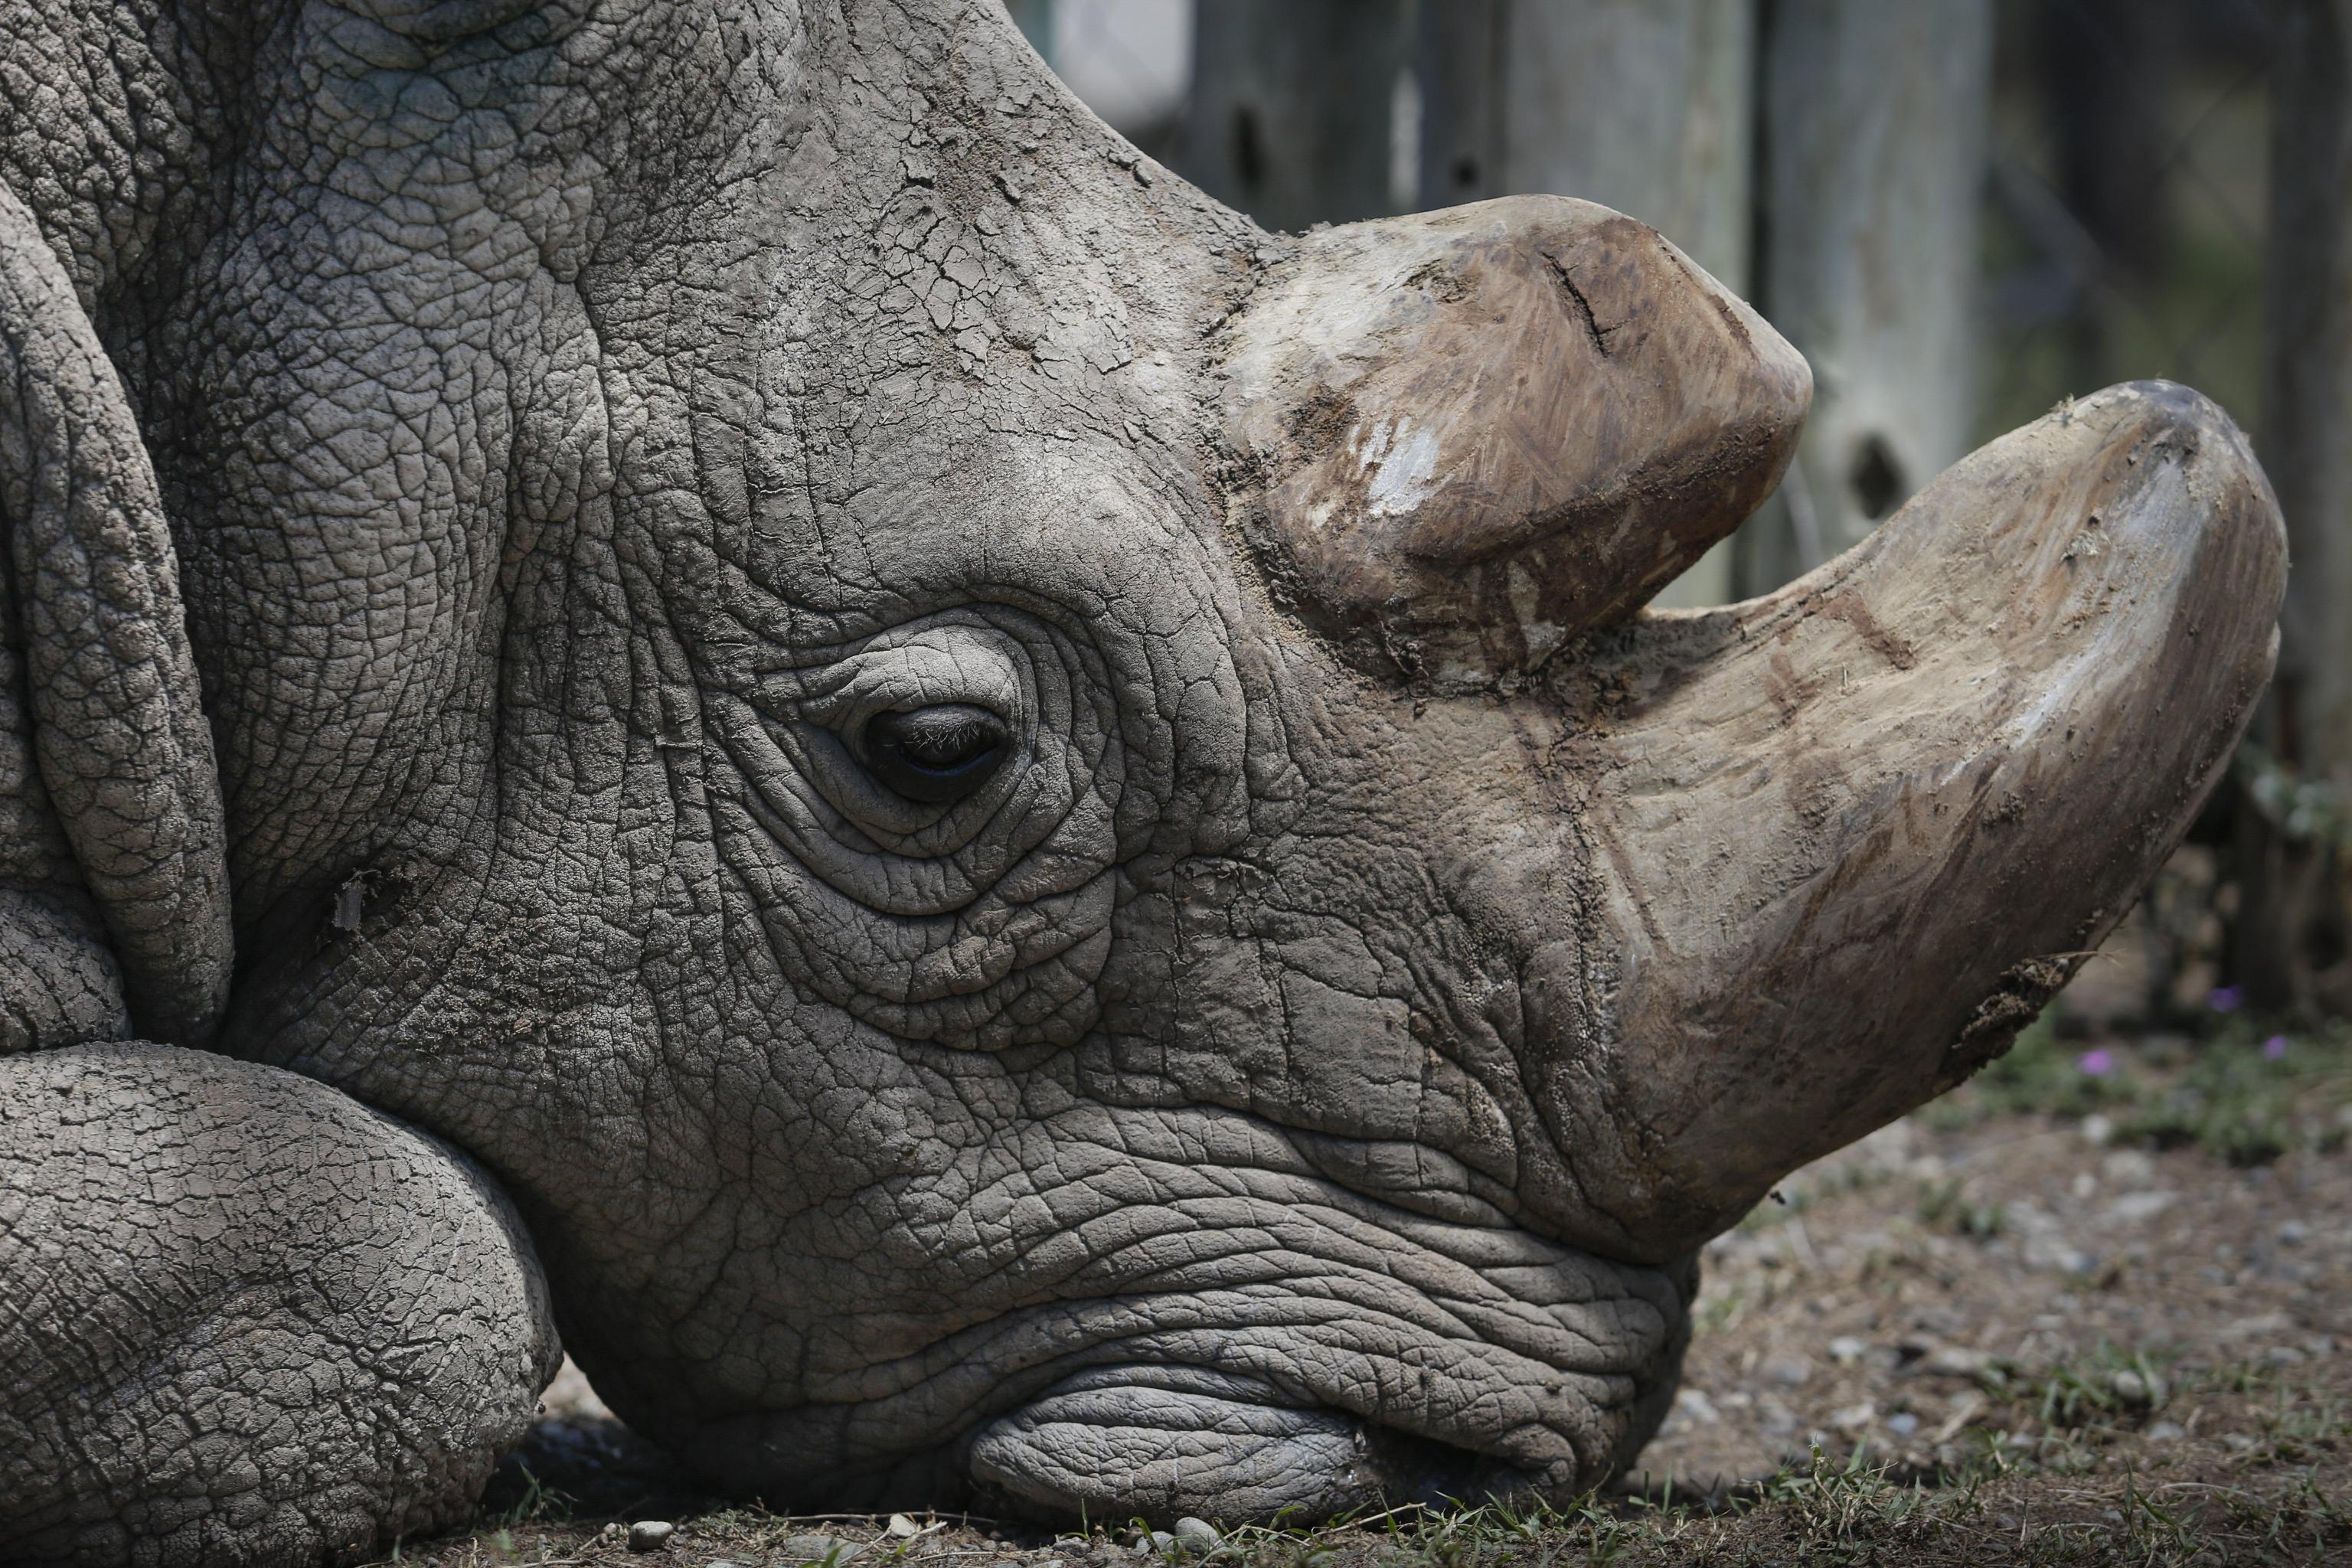 epa06615211 (FILE) - Forty three-year-old Sudan, the last surviving male northern white rhino on the planet, looks on at Ol Pejeta Conservancy near Nanyuki, some 200 kilometers north of Nairobi, Kenya, 03 May 2017 (reissued 20 March 2018). Ol Pejeta Conservancy, where Sudan and the world's last two female northern white rhinos live, announced on 20 March that forty five-year-old Sudan has died at the Conservancy on 19 March. Sudan was suffering from degenerative changes in muscles and bones combined with skin wounds so that the veterinary team had to make a decision to euthanize him, Ol Pejeta Conservancy said in a statement. With Sudan's death, the world is left with just two female nortthern whino rhinos.  EPA/DAI KUROKAWA